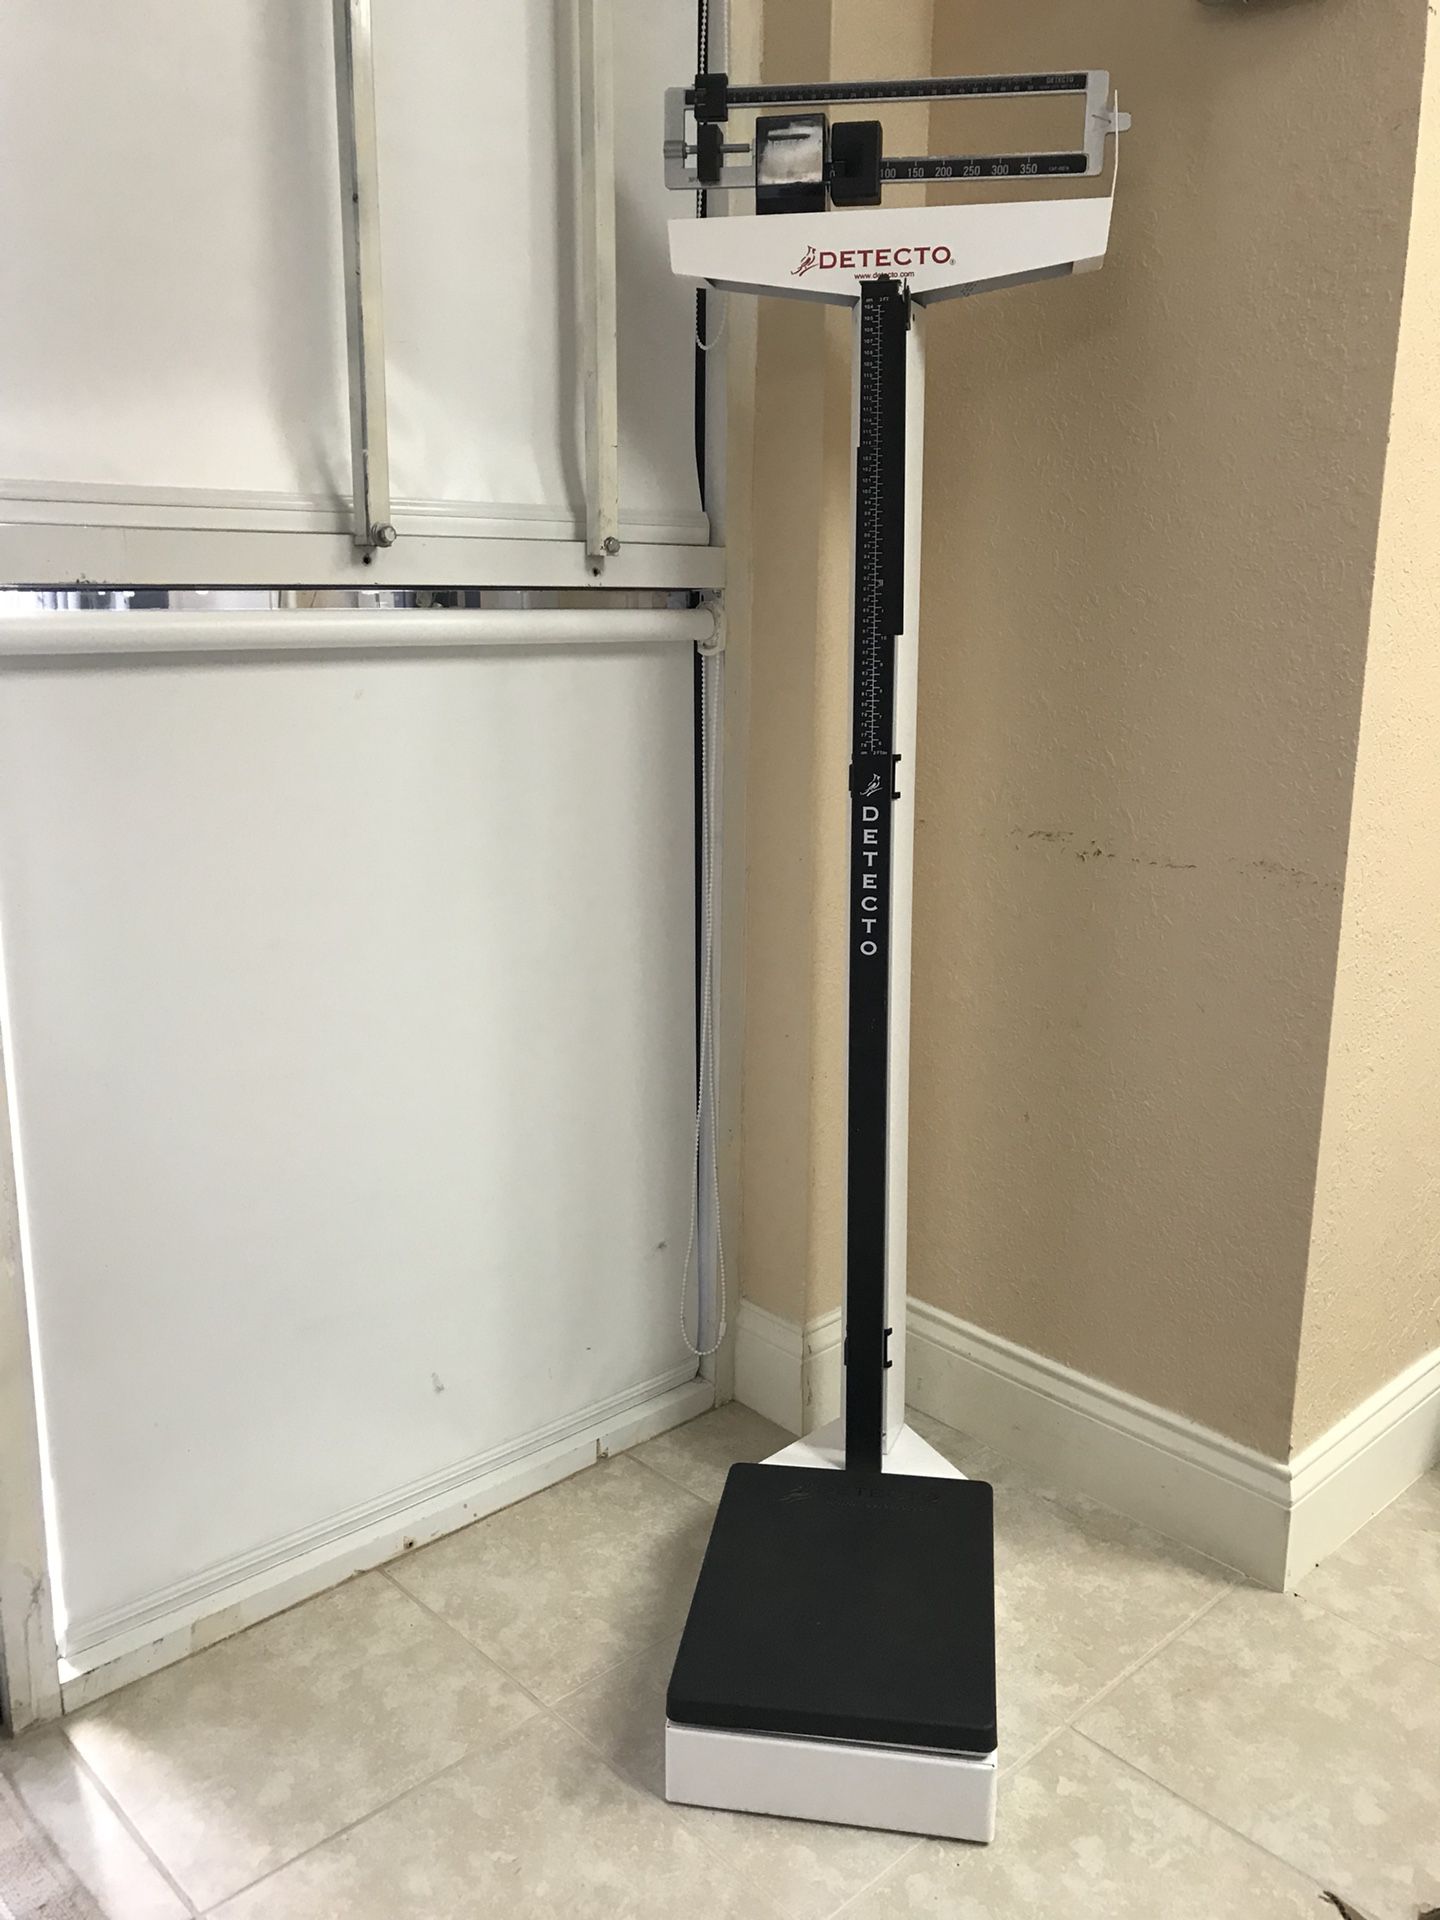 medical patient scale, like “NEW” minimal use if any. DETECTO model 439.  Clinic, rehab, doctor, office, gym, fitness, for Sale in Miami, FL - OfferUp